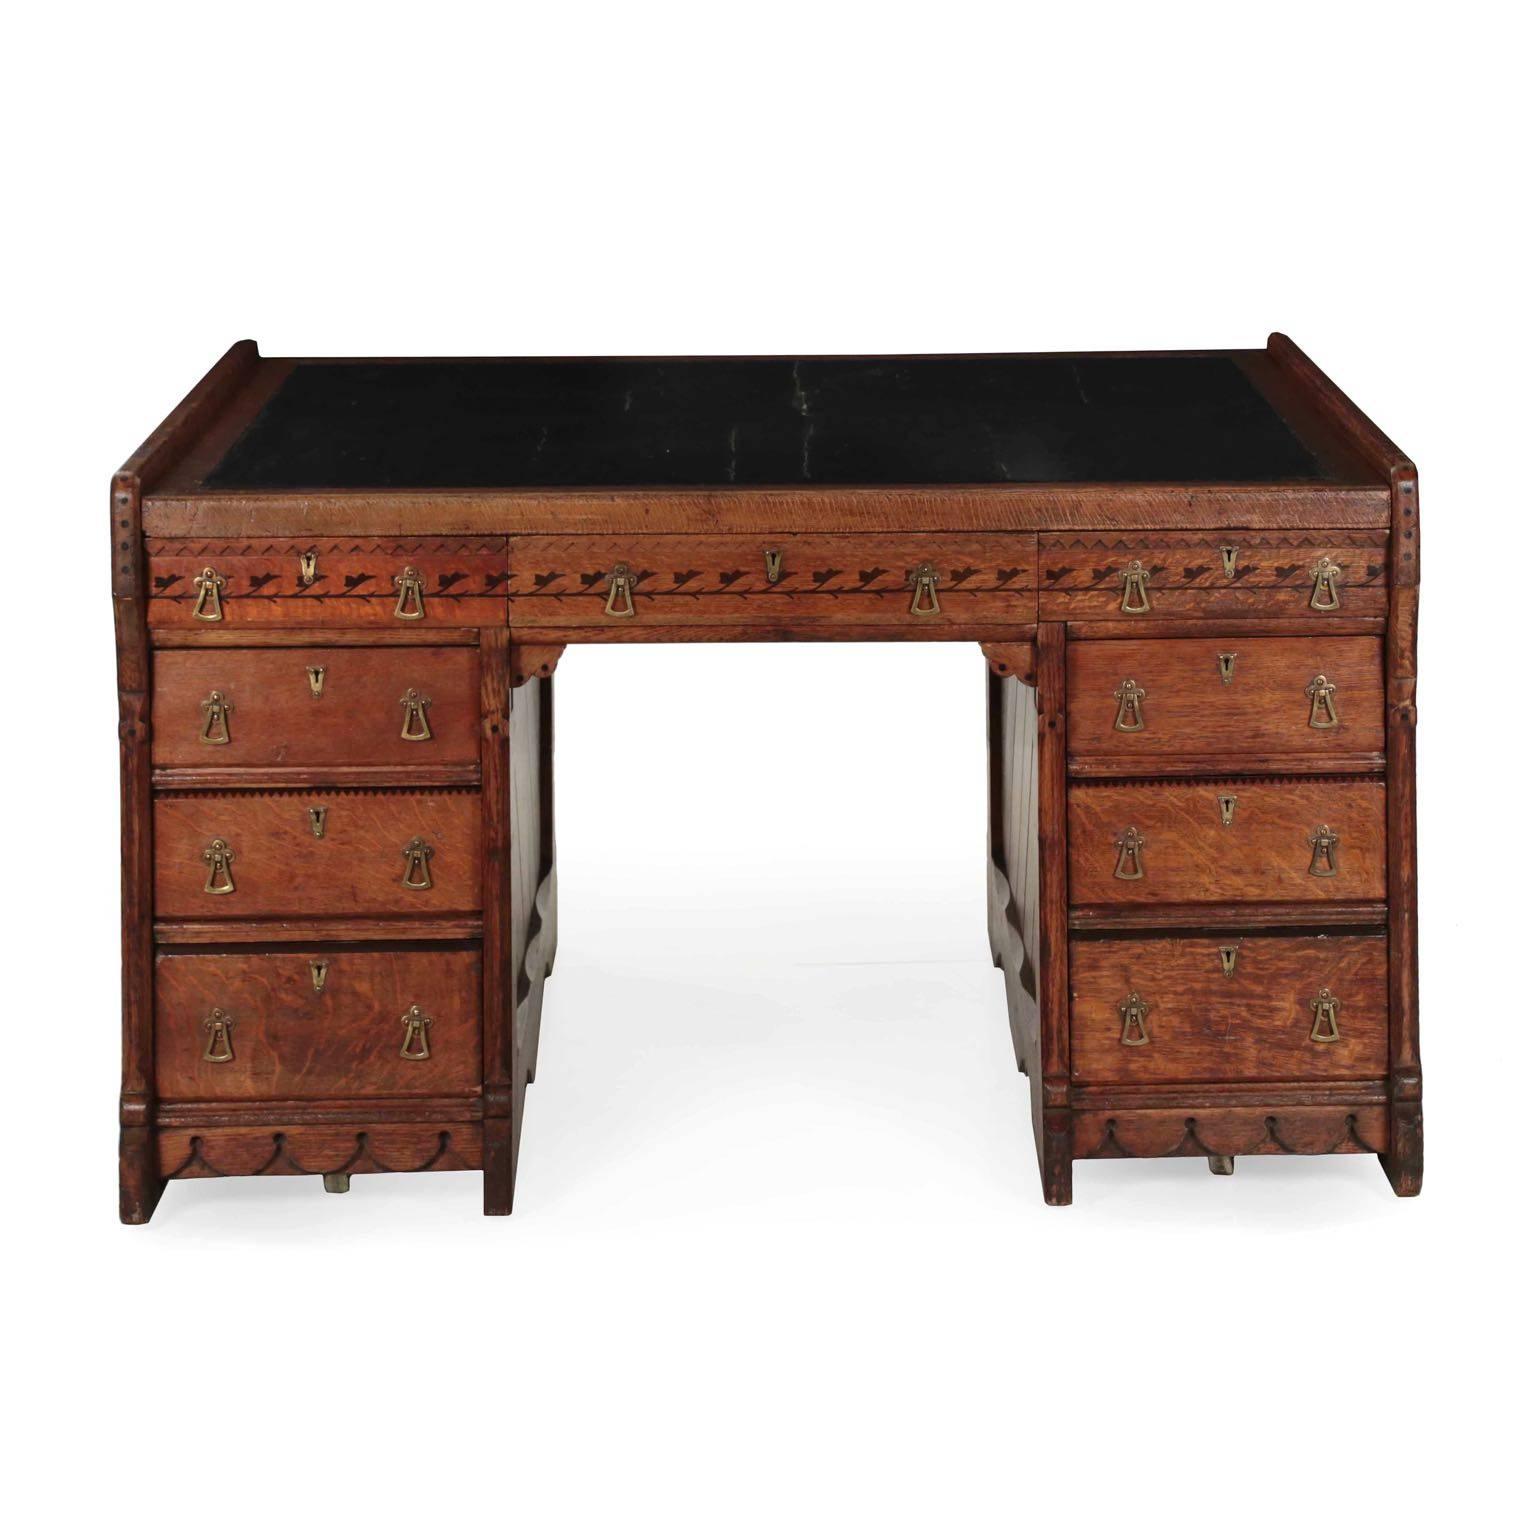 A beautifully crafted desk that embodies the concept of the “Partners Desk”, it is inordinately large and spacious with a full retinue of drawers on either side accompanied by a broad clean working surface finished in Greek-key embossed leather. The